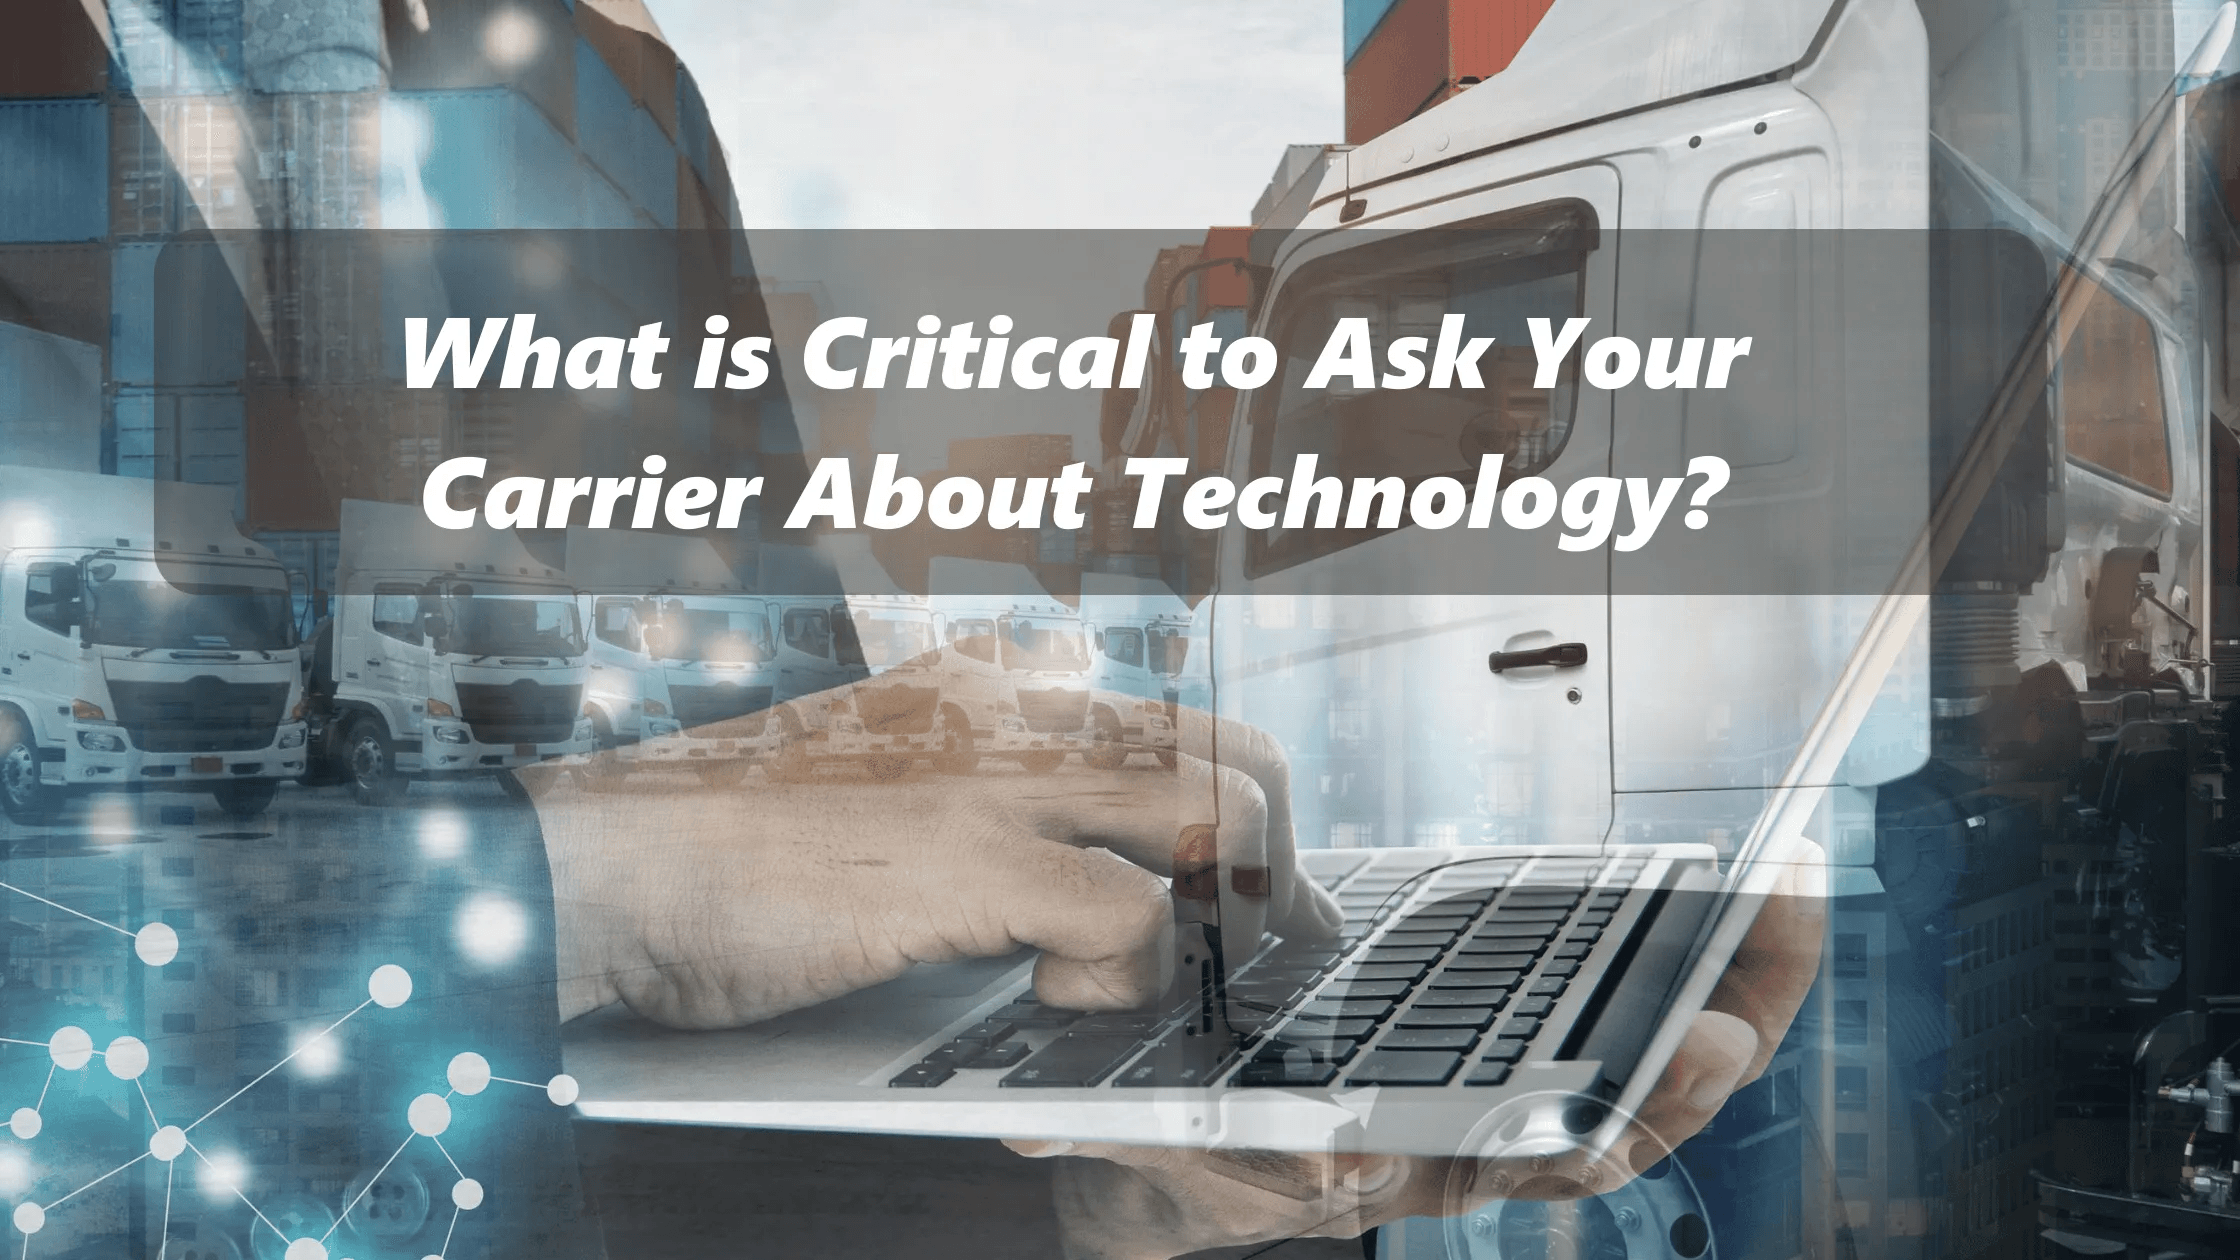 What is critical to ask your carrier about technology?